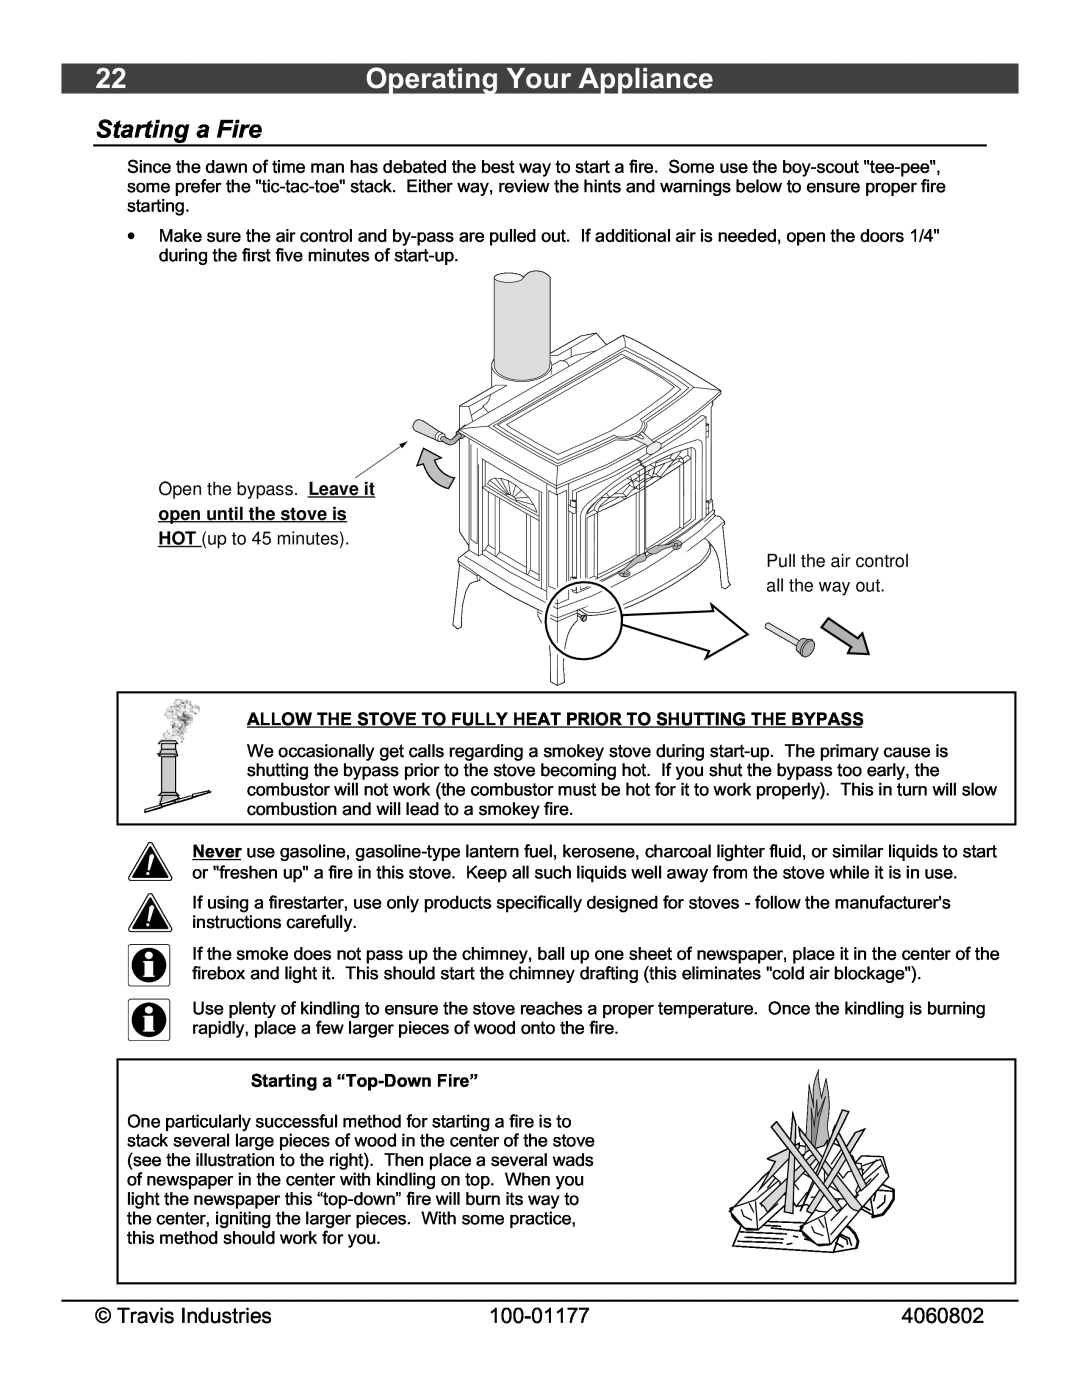 Lopi 028-S-75-2 owner manual Operating Your Appliance, Starting a Fire, open until the stove is, Starting a “Top-DownFire” 